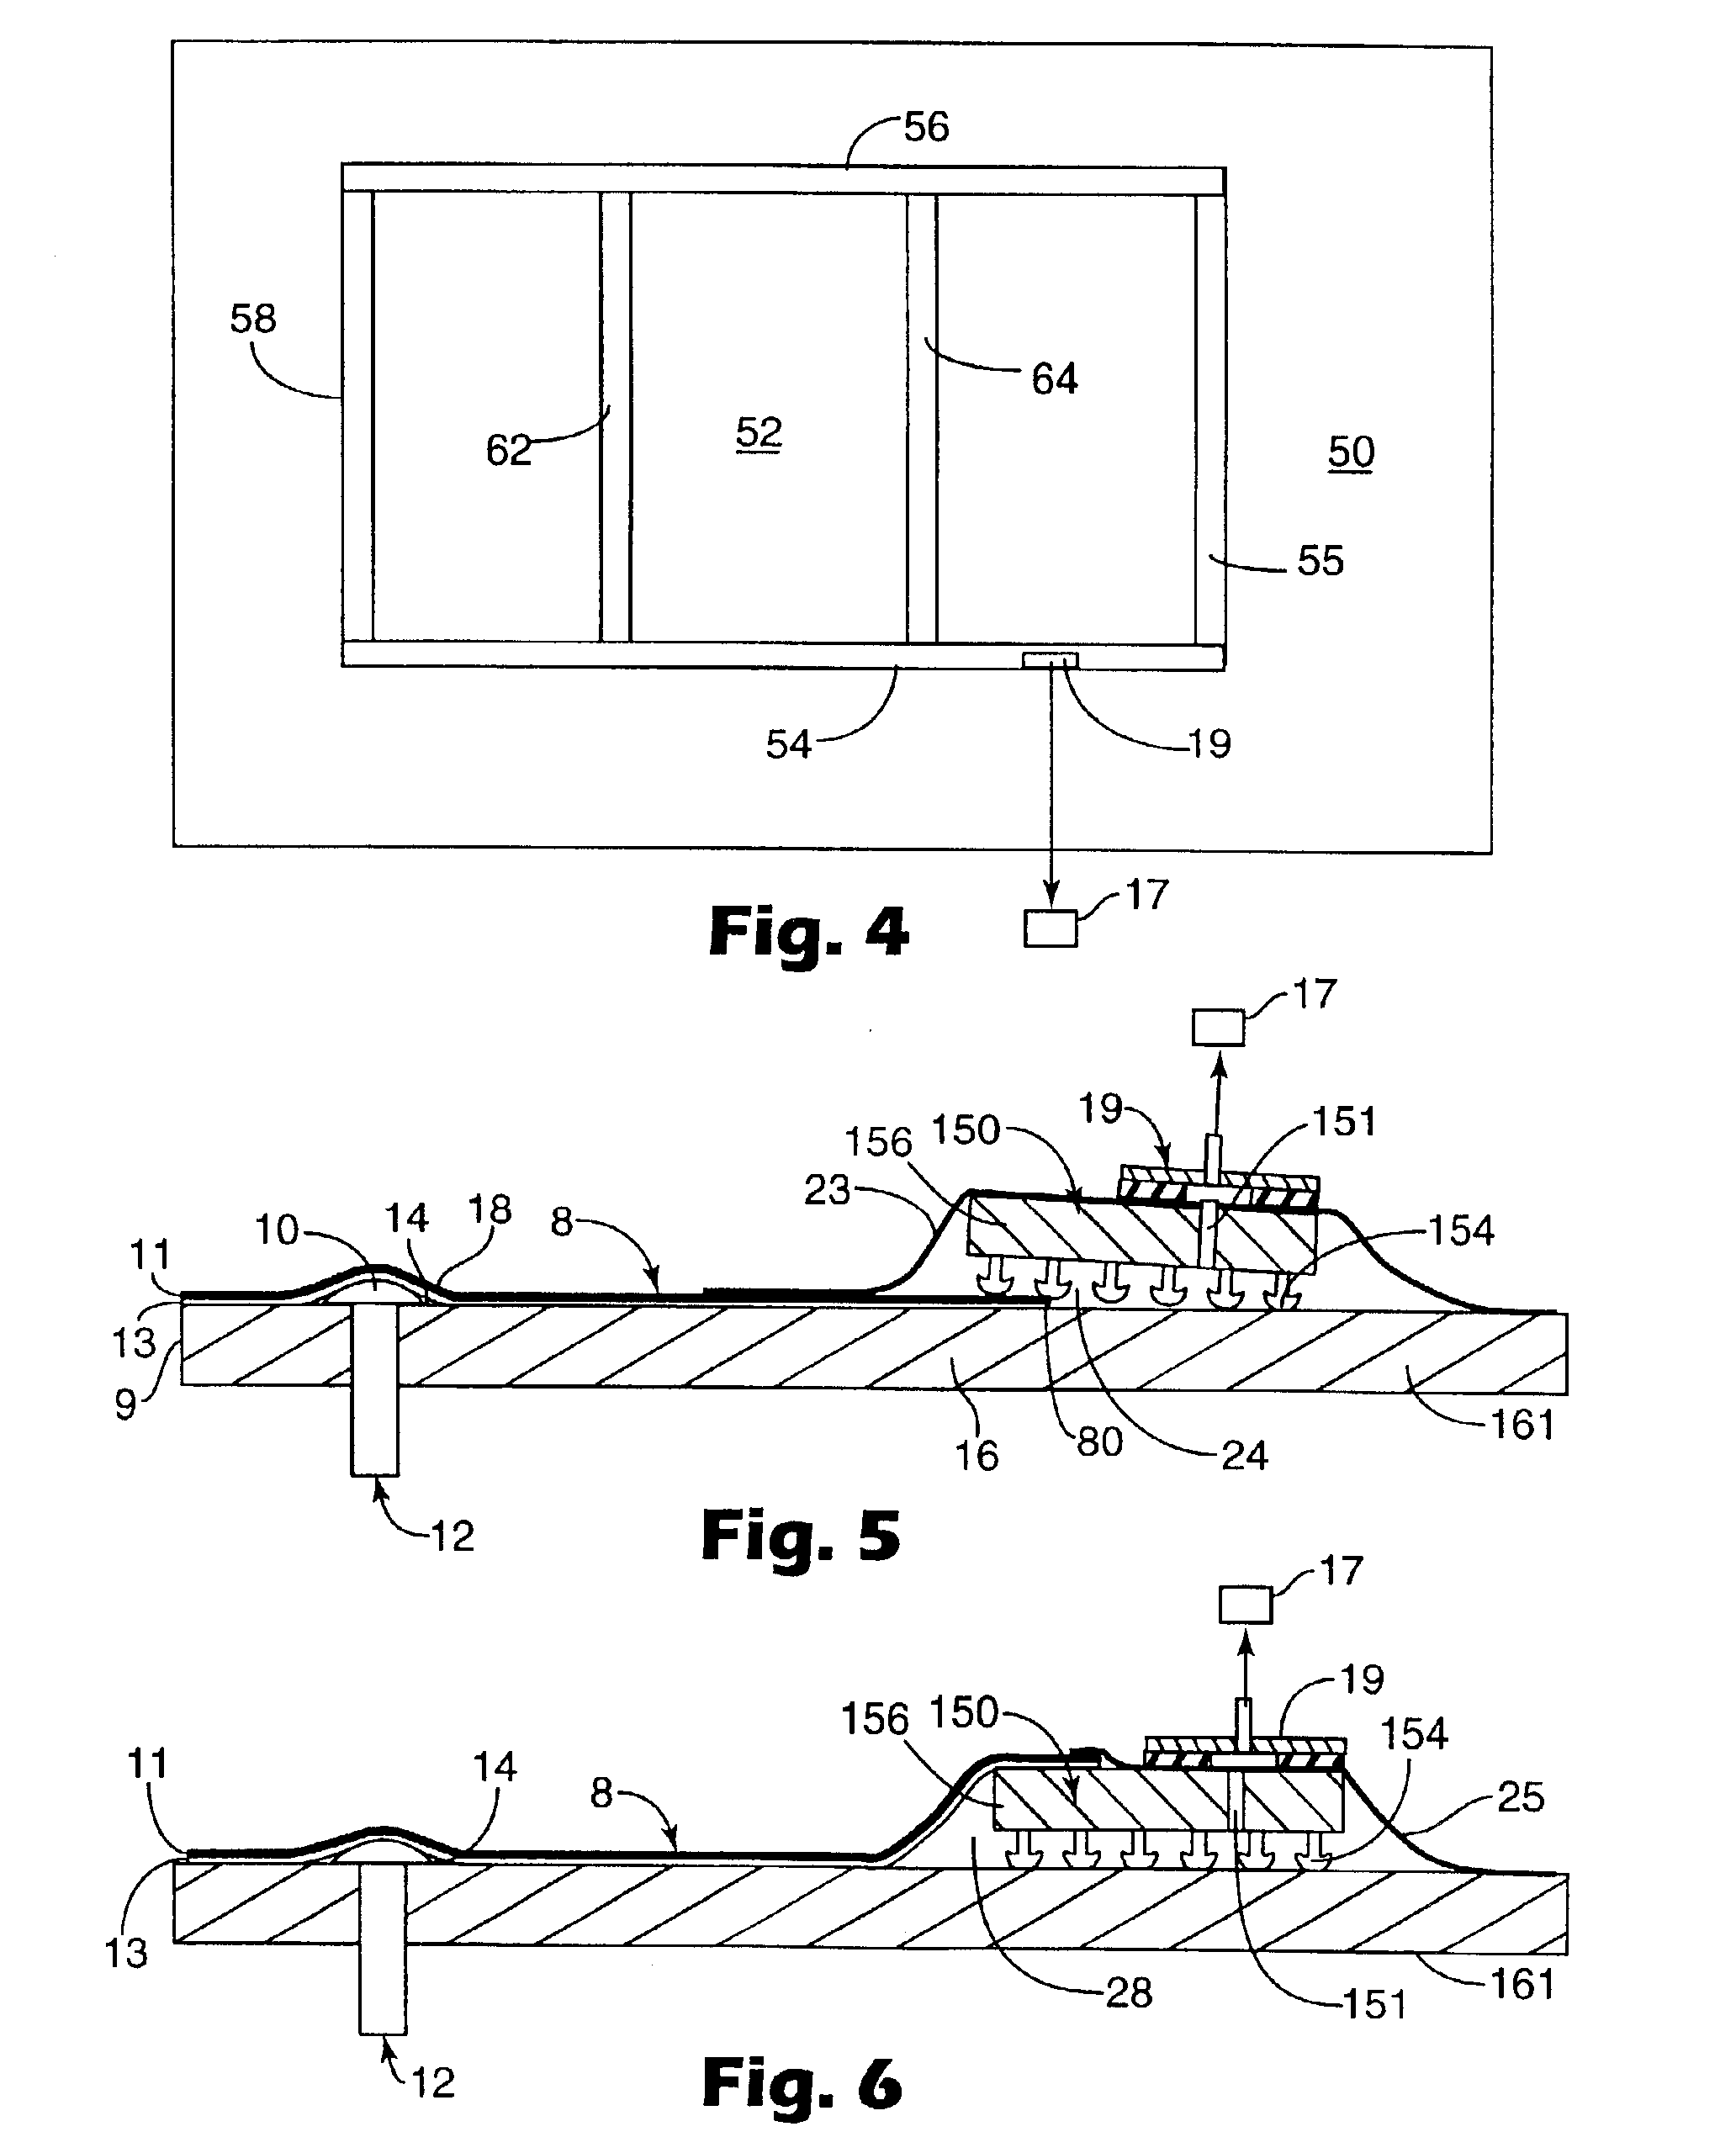 Method of conforming an adherent film to a substrate by application of vacuum